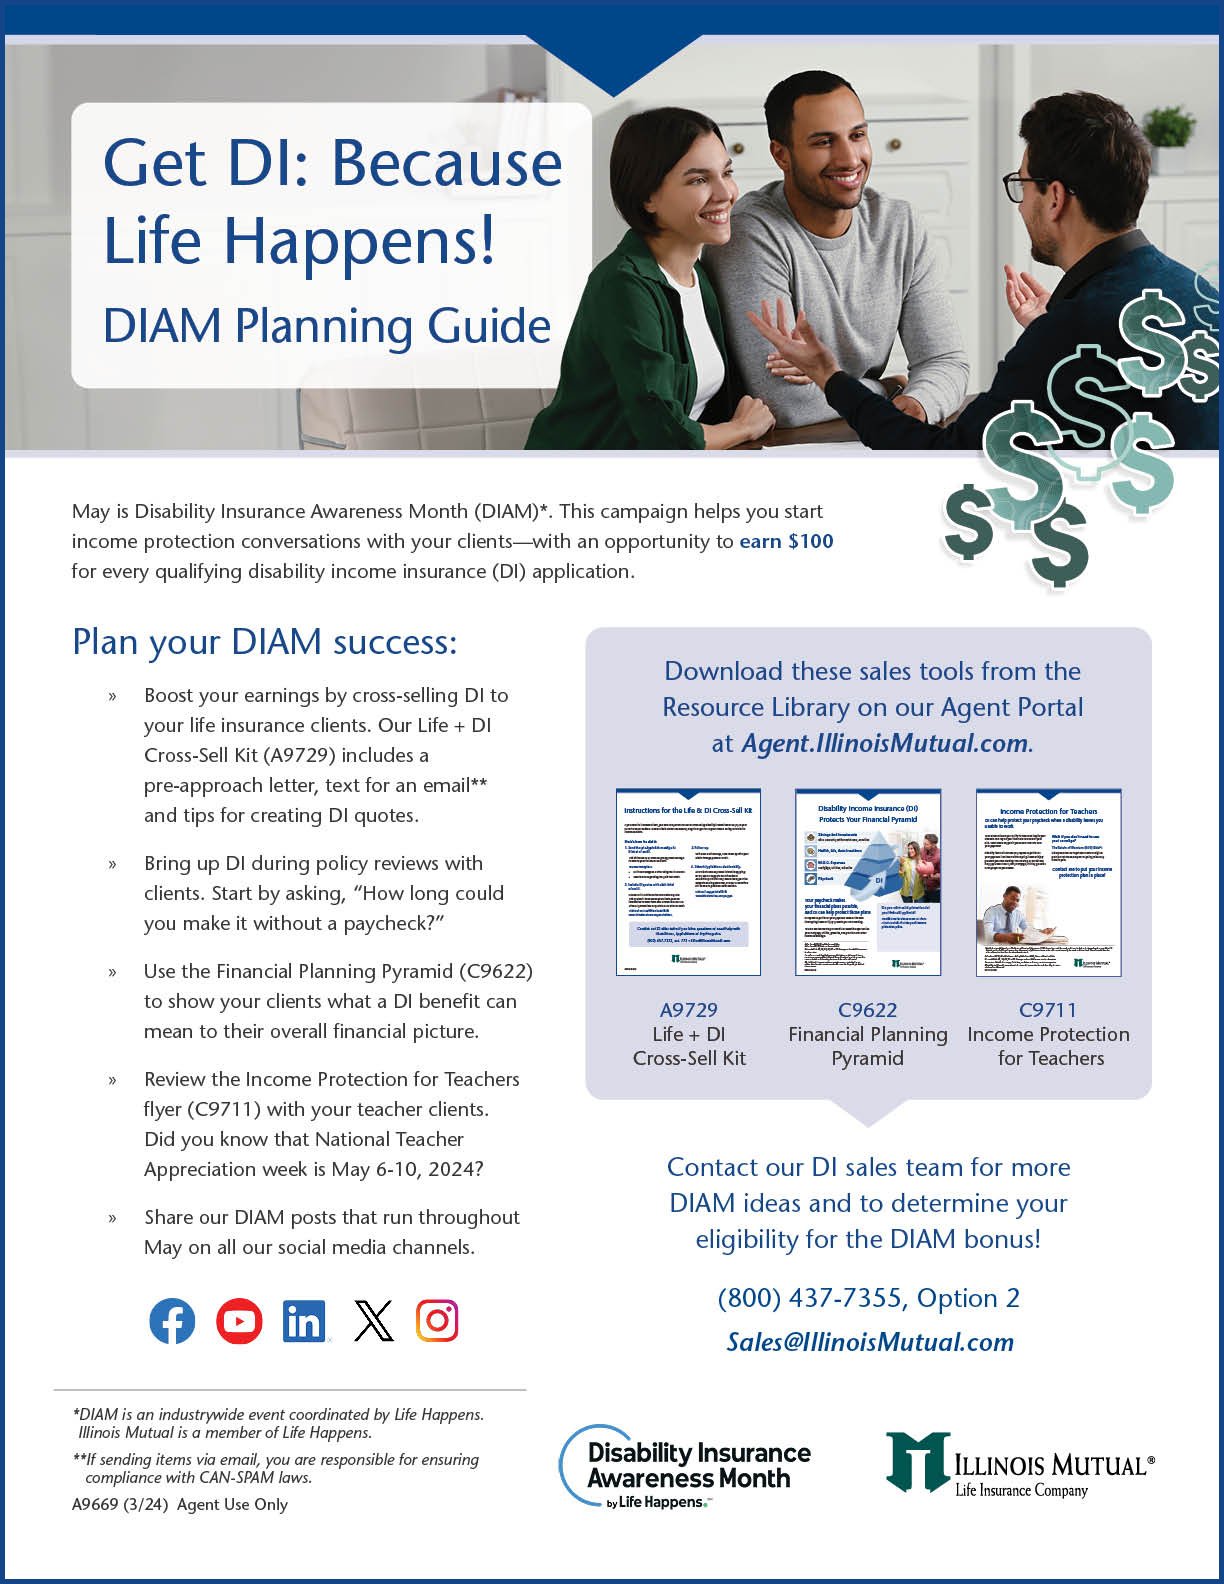 Image of Get DI Because Life Happens flyer (A9669)